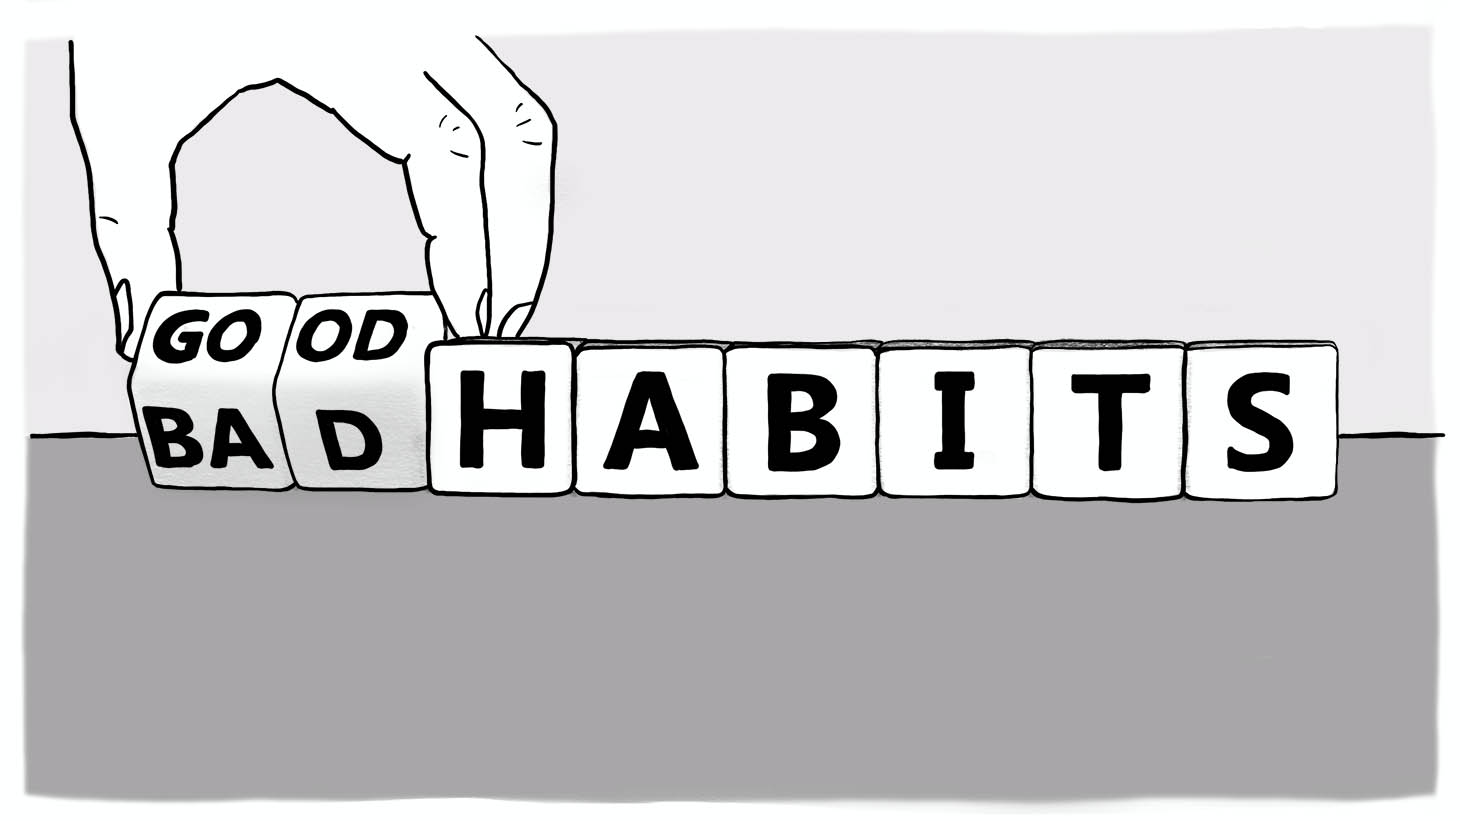 Letter blocks flipping from BAD habits to GOOD habits